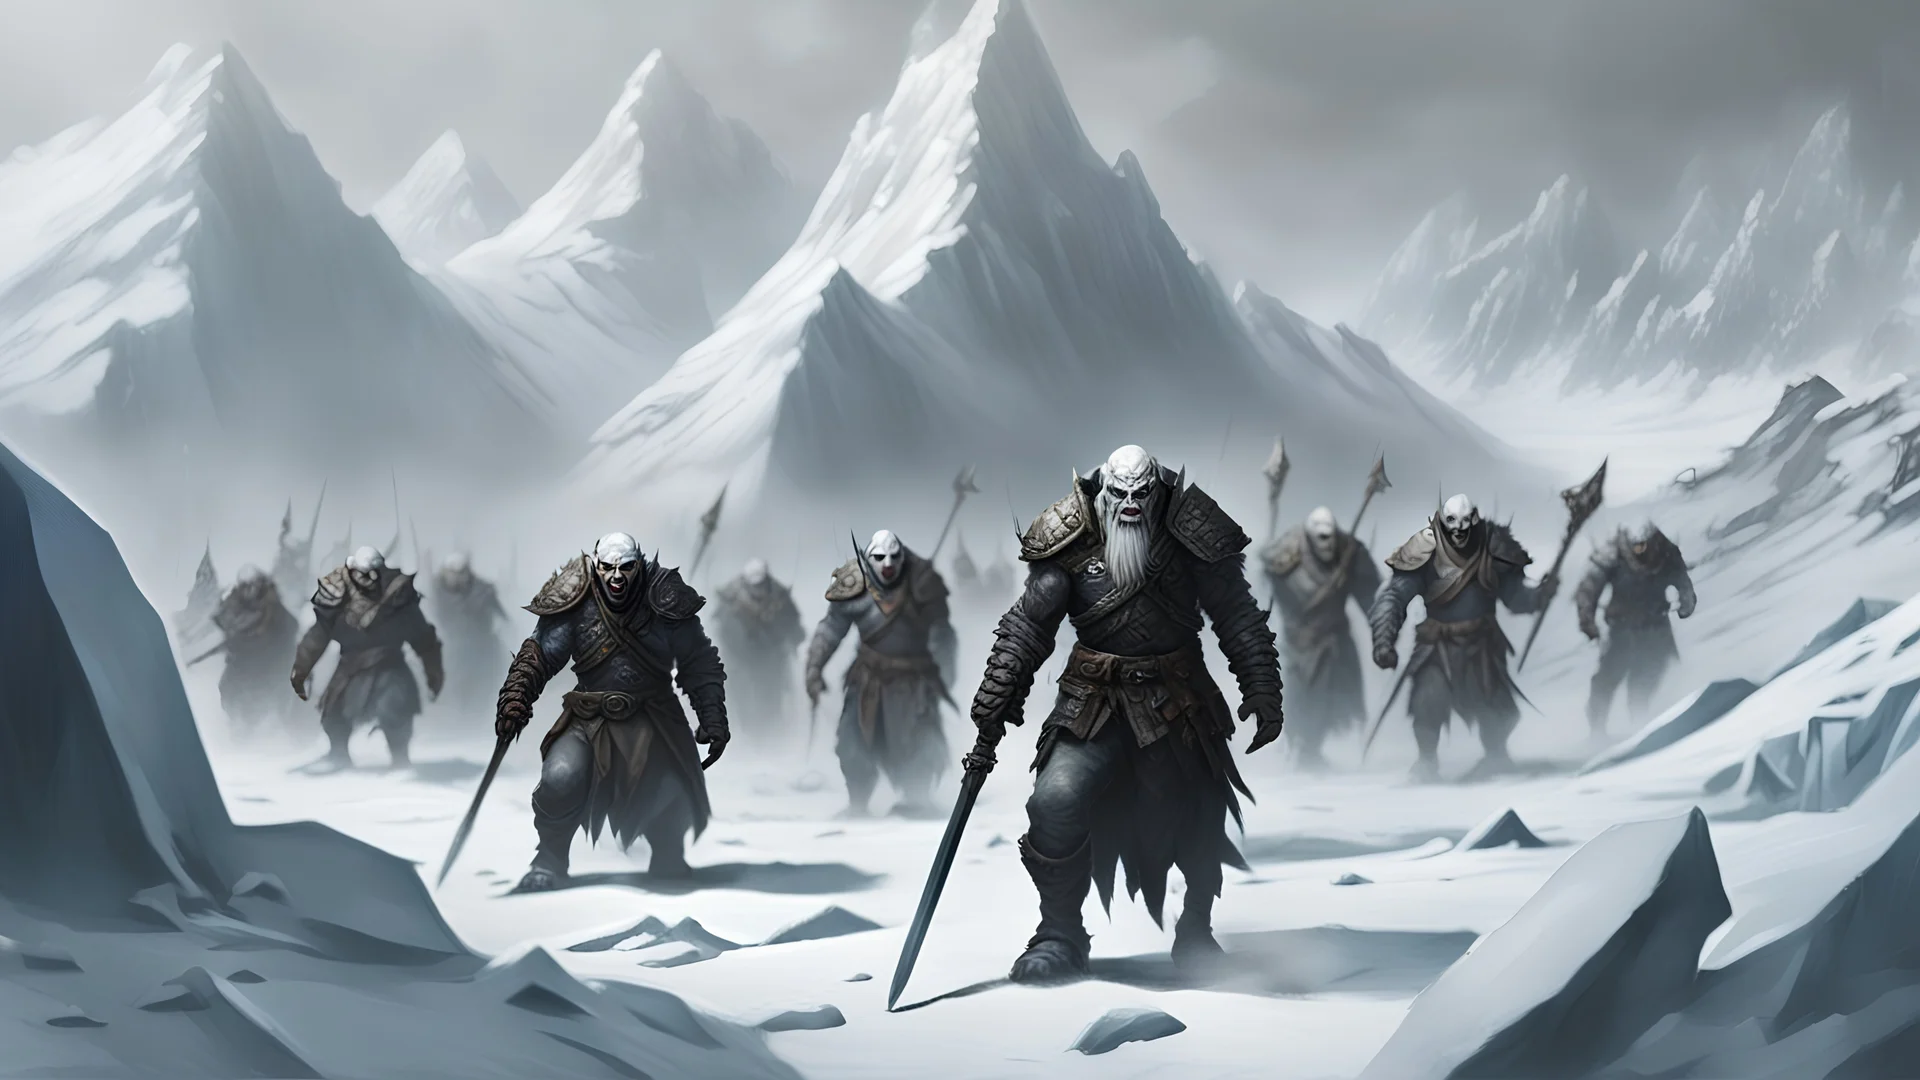 White orcs emerging from the frozen peaks of ice cold mountains. Wild orcs, heavily armed, white skin, deep scars, torn banners. Led by a cloaked dooming figure.